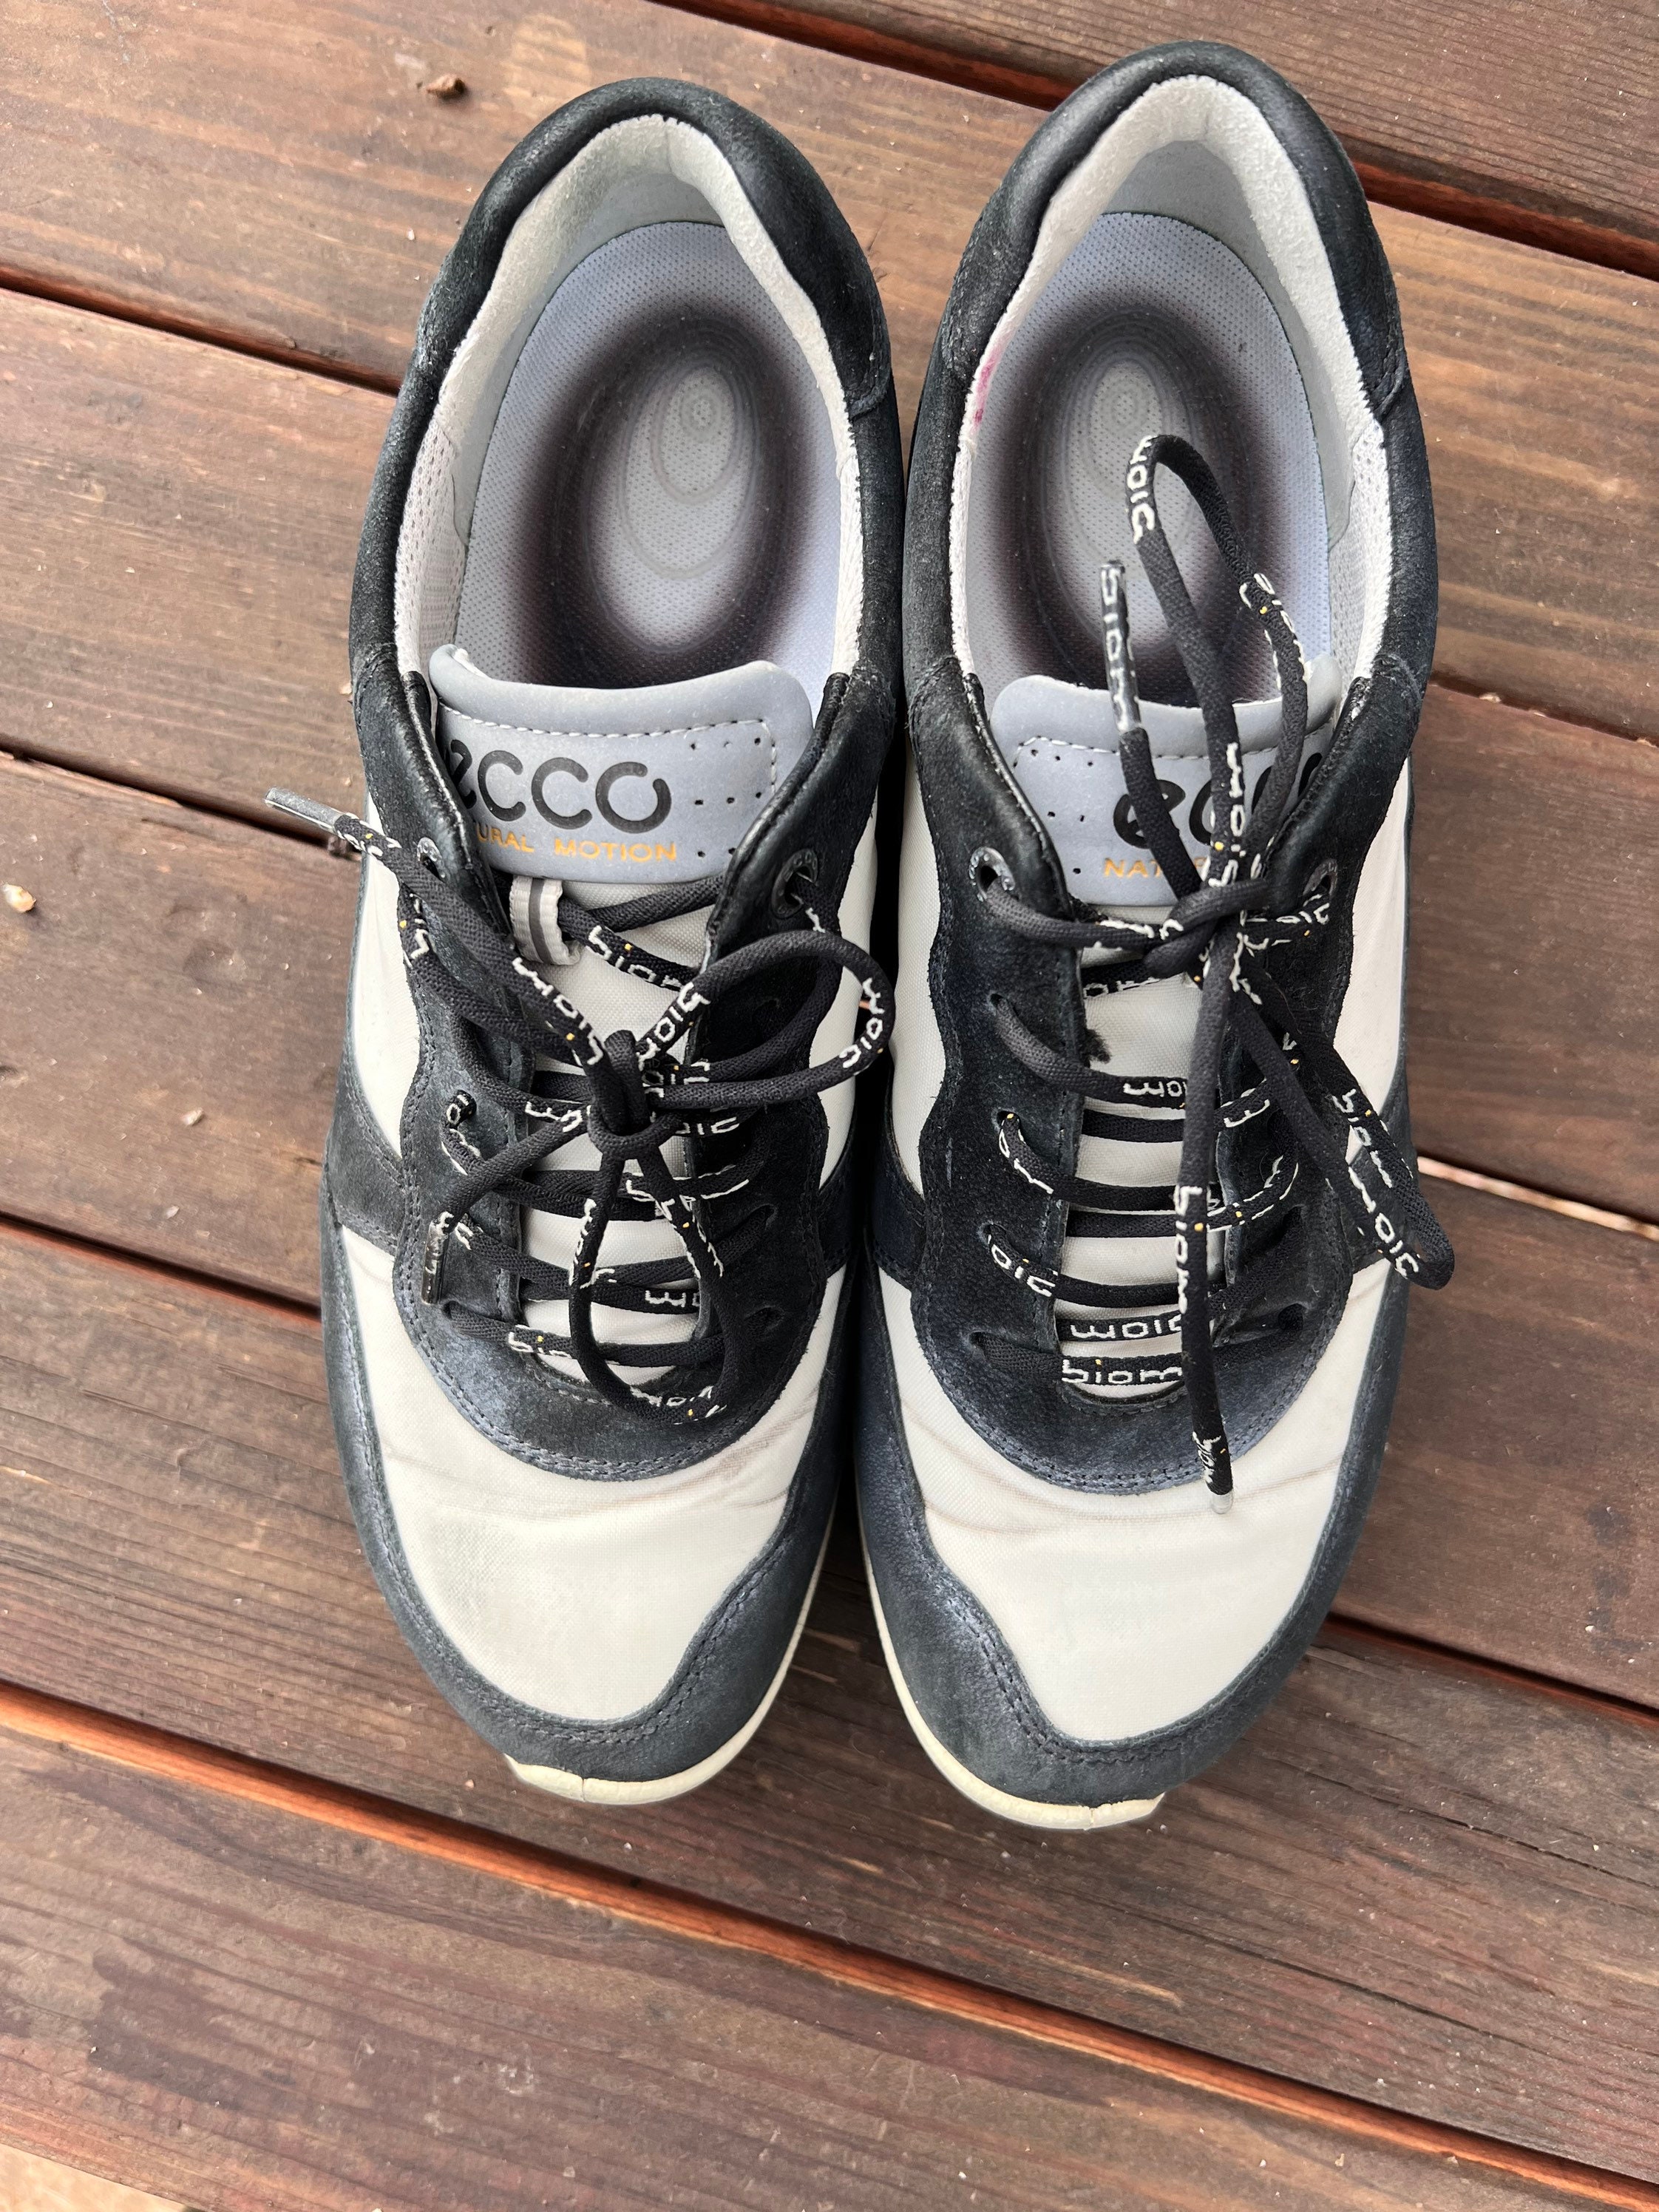 Ecco, Shoes, Ecco Shoes Size 4 Like New